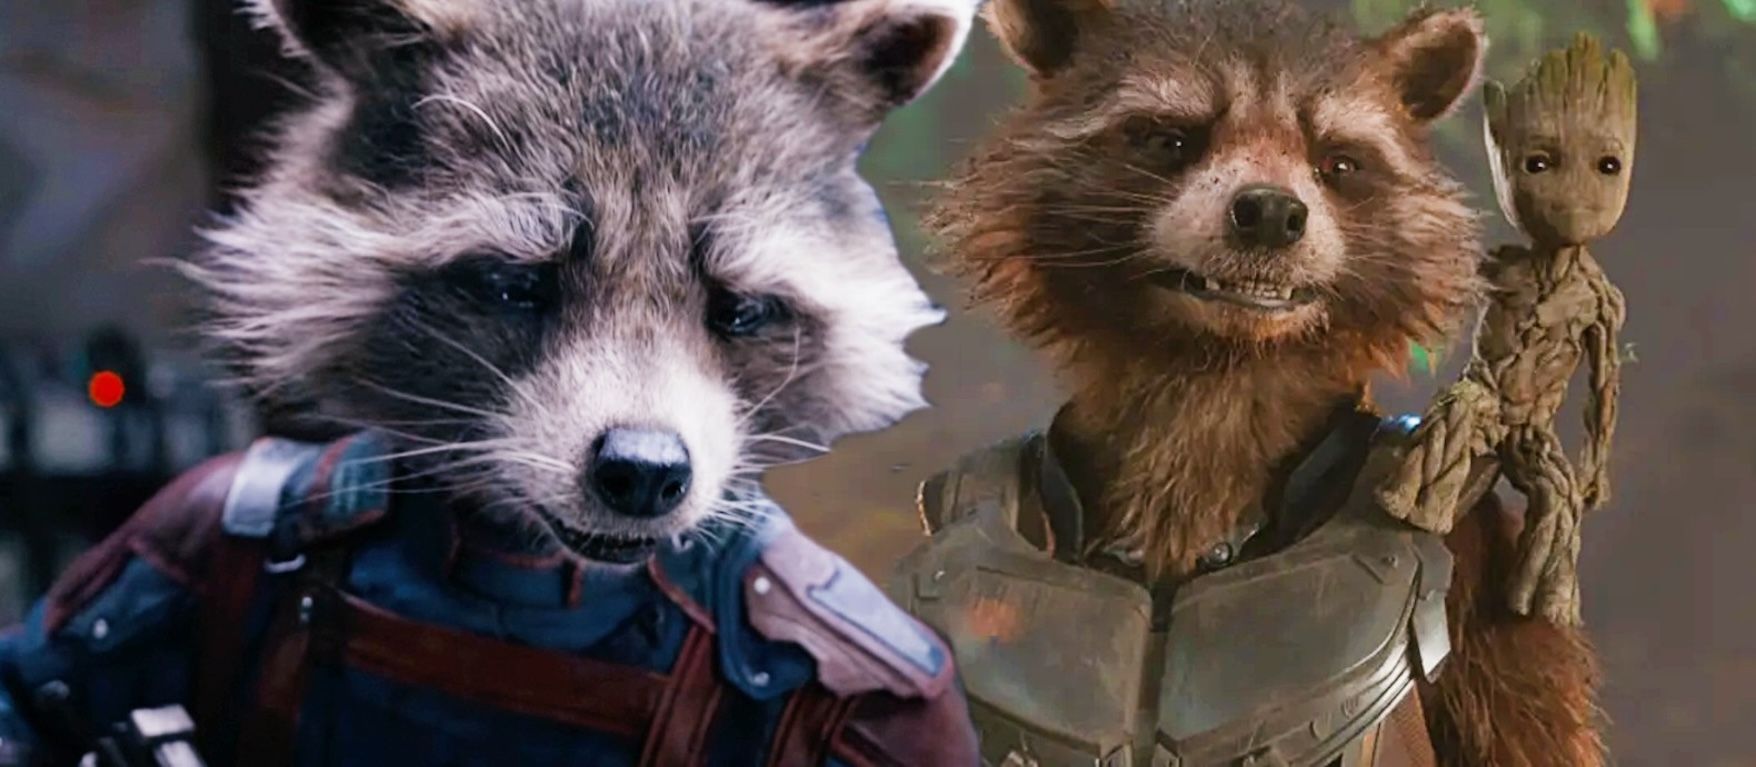 Rocket Raccoon from Guardians of the Galaxy